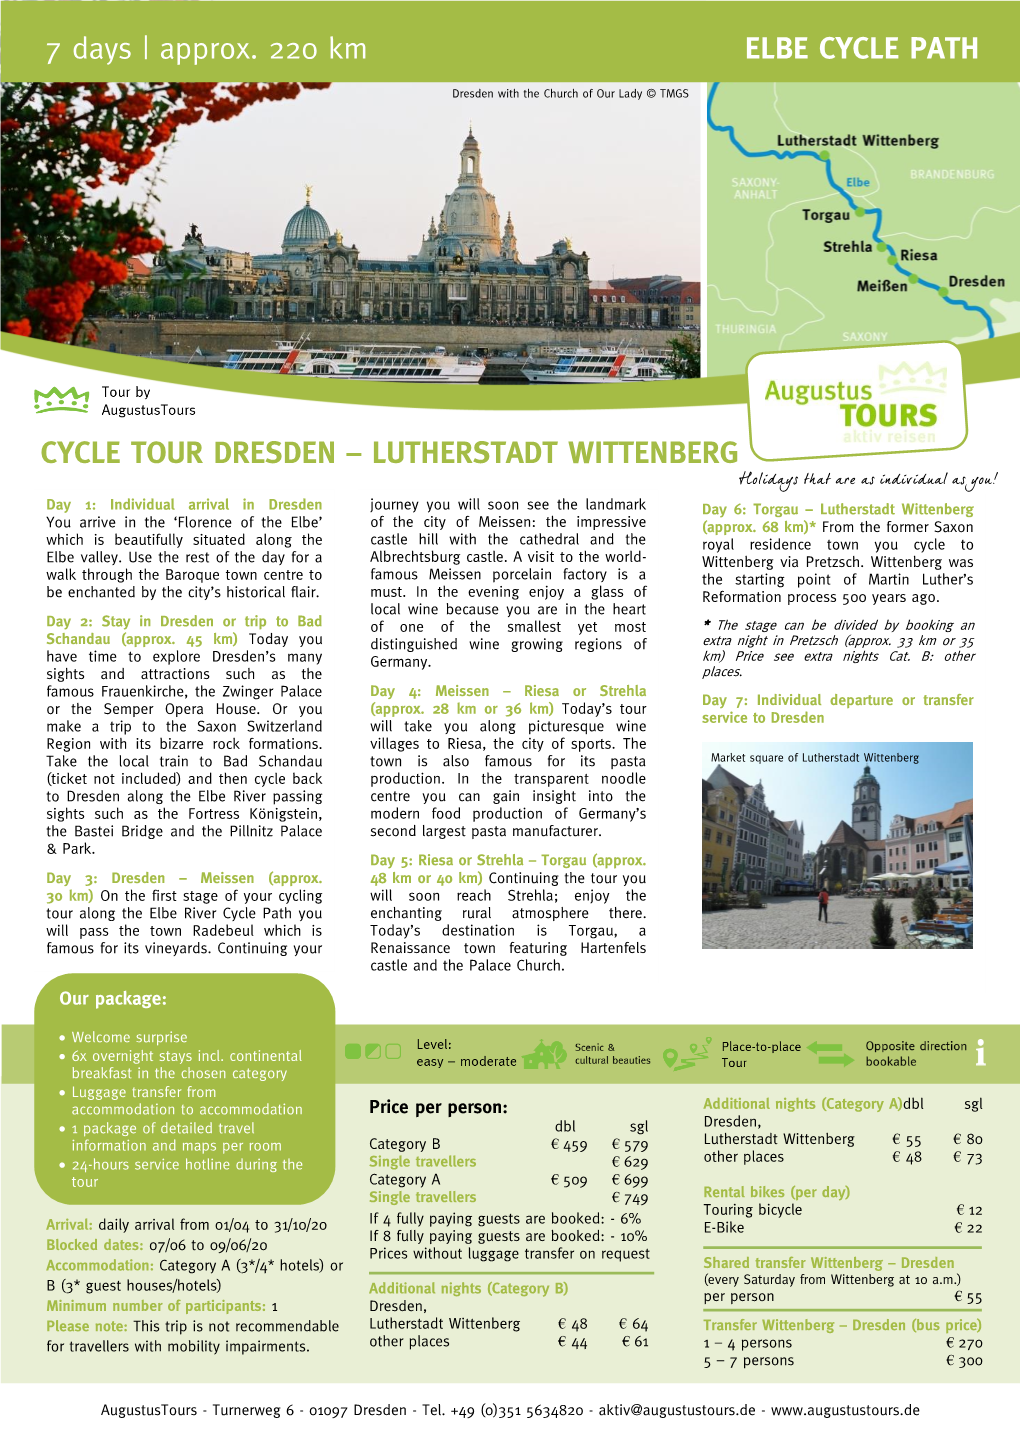 7 Days | Approx. 220 Km ELBE CYCLE PATH CYCLE TOUR DRESDEN